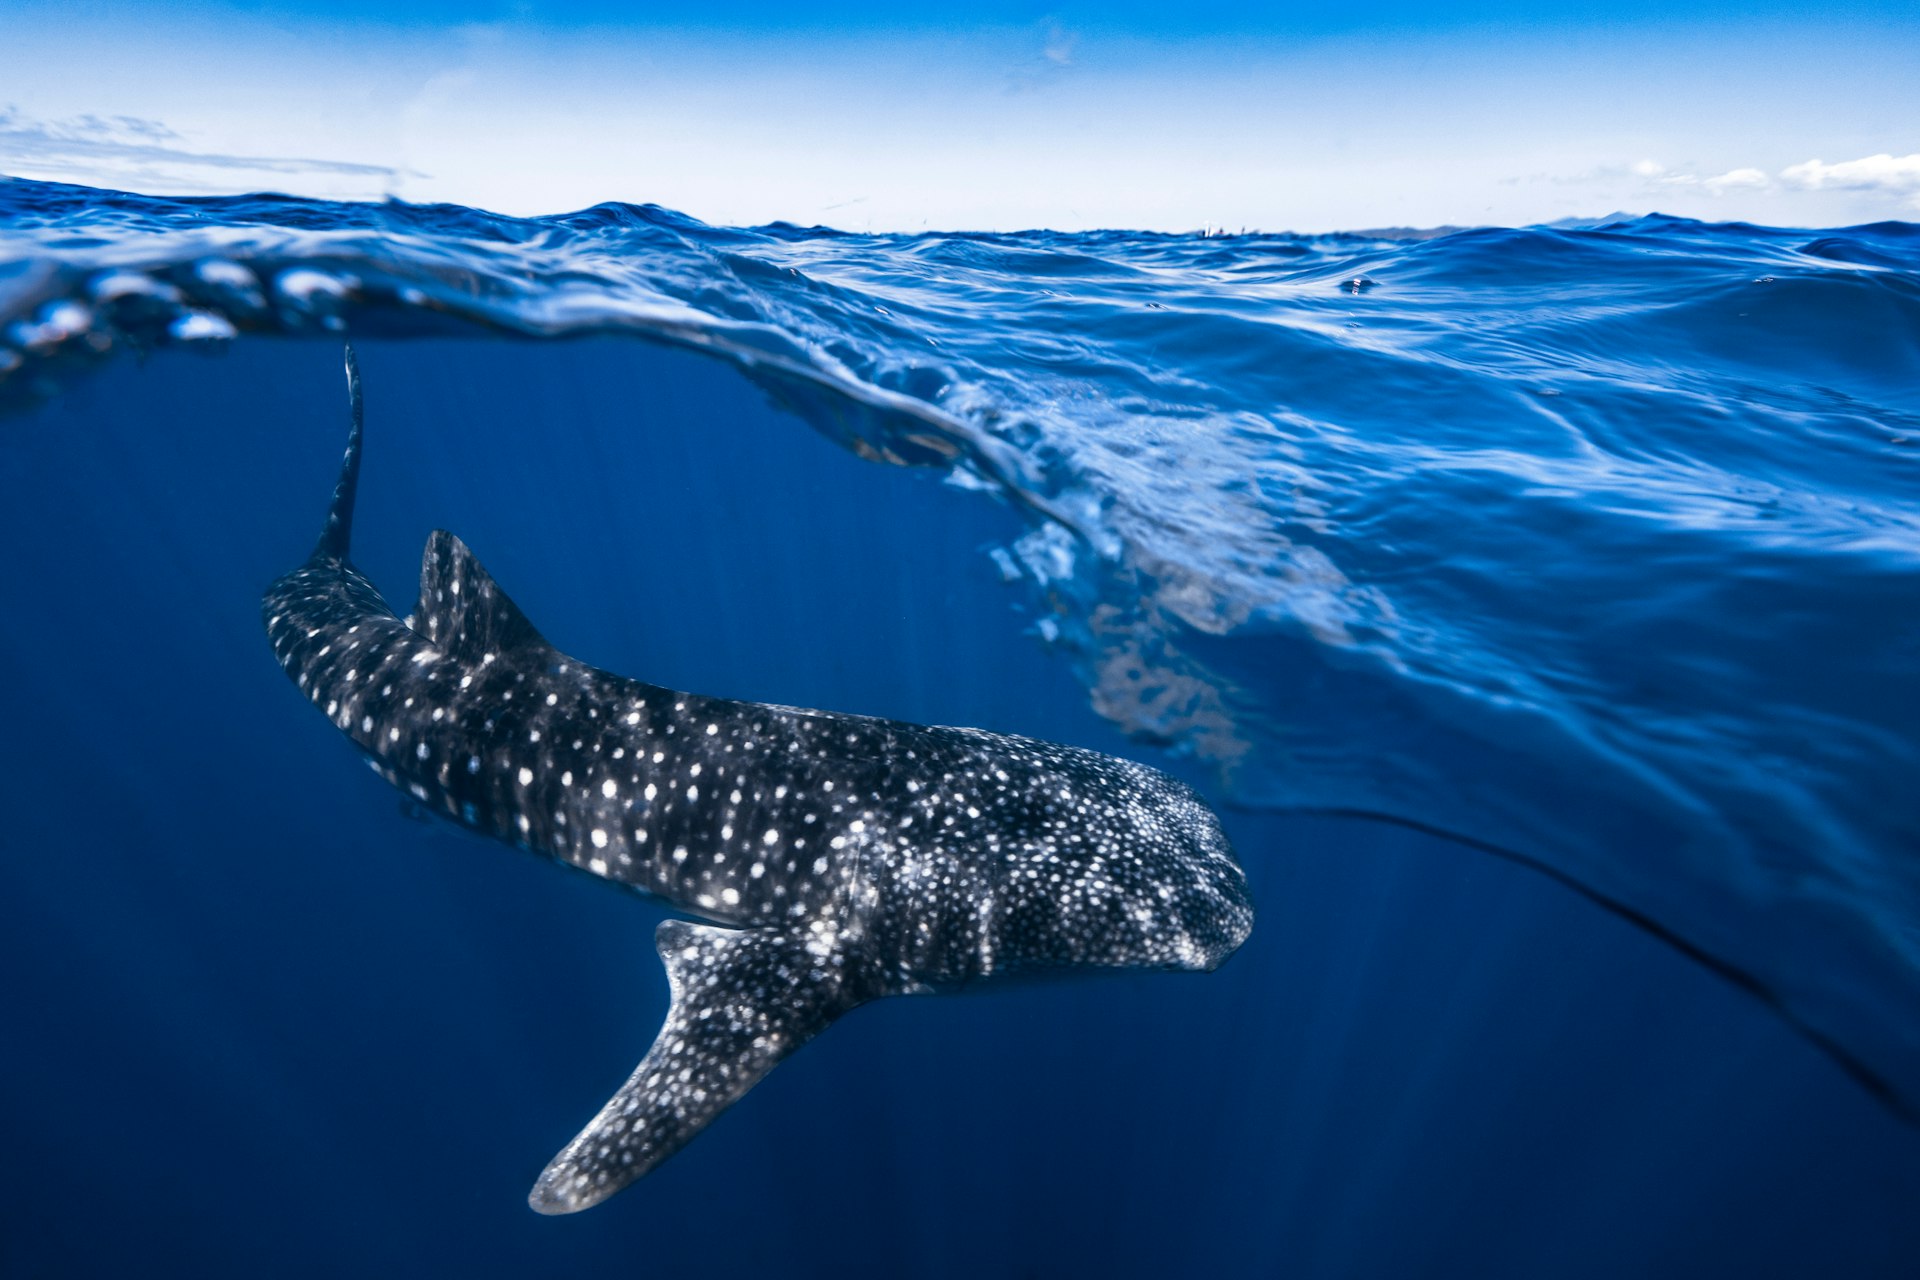 An image that looks both above and below the water, shows a large whale shark swimming just below the surface.